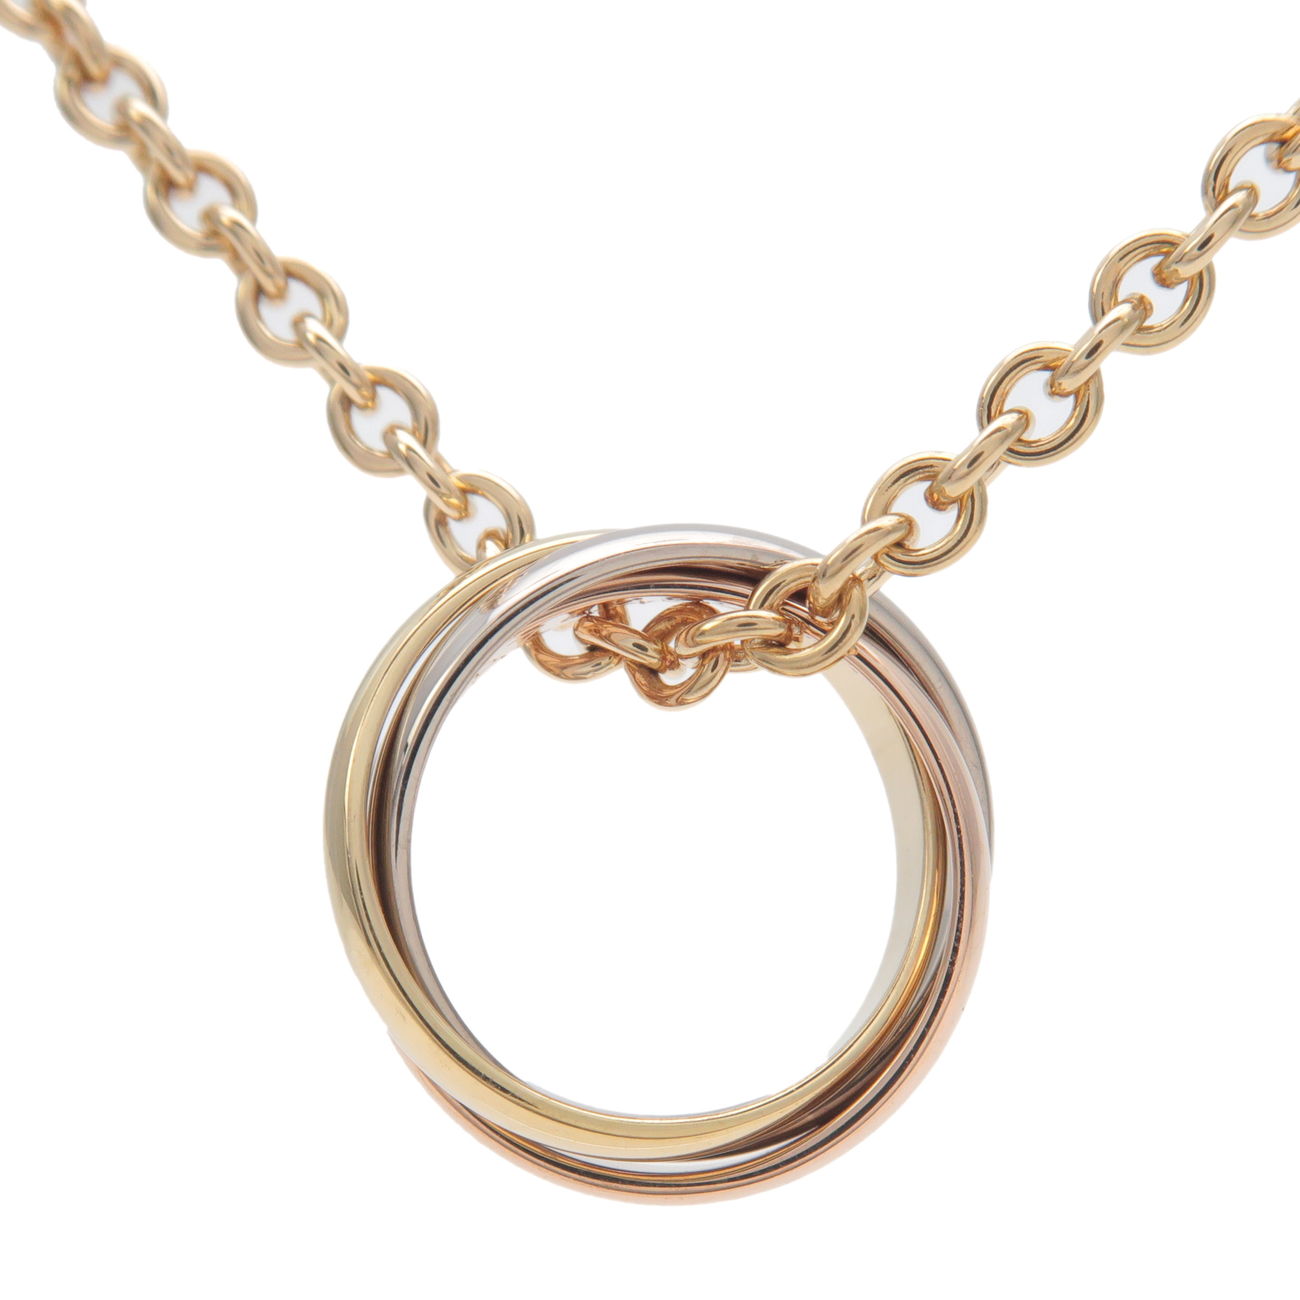 Cartier Trinity Necklace K18 750 Yellow/White/Rose Gold